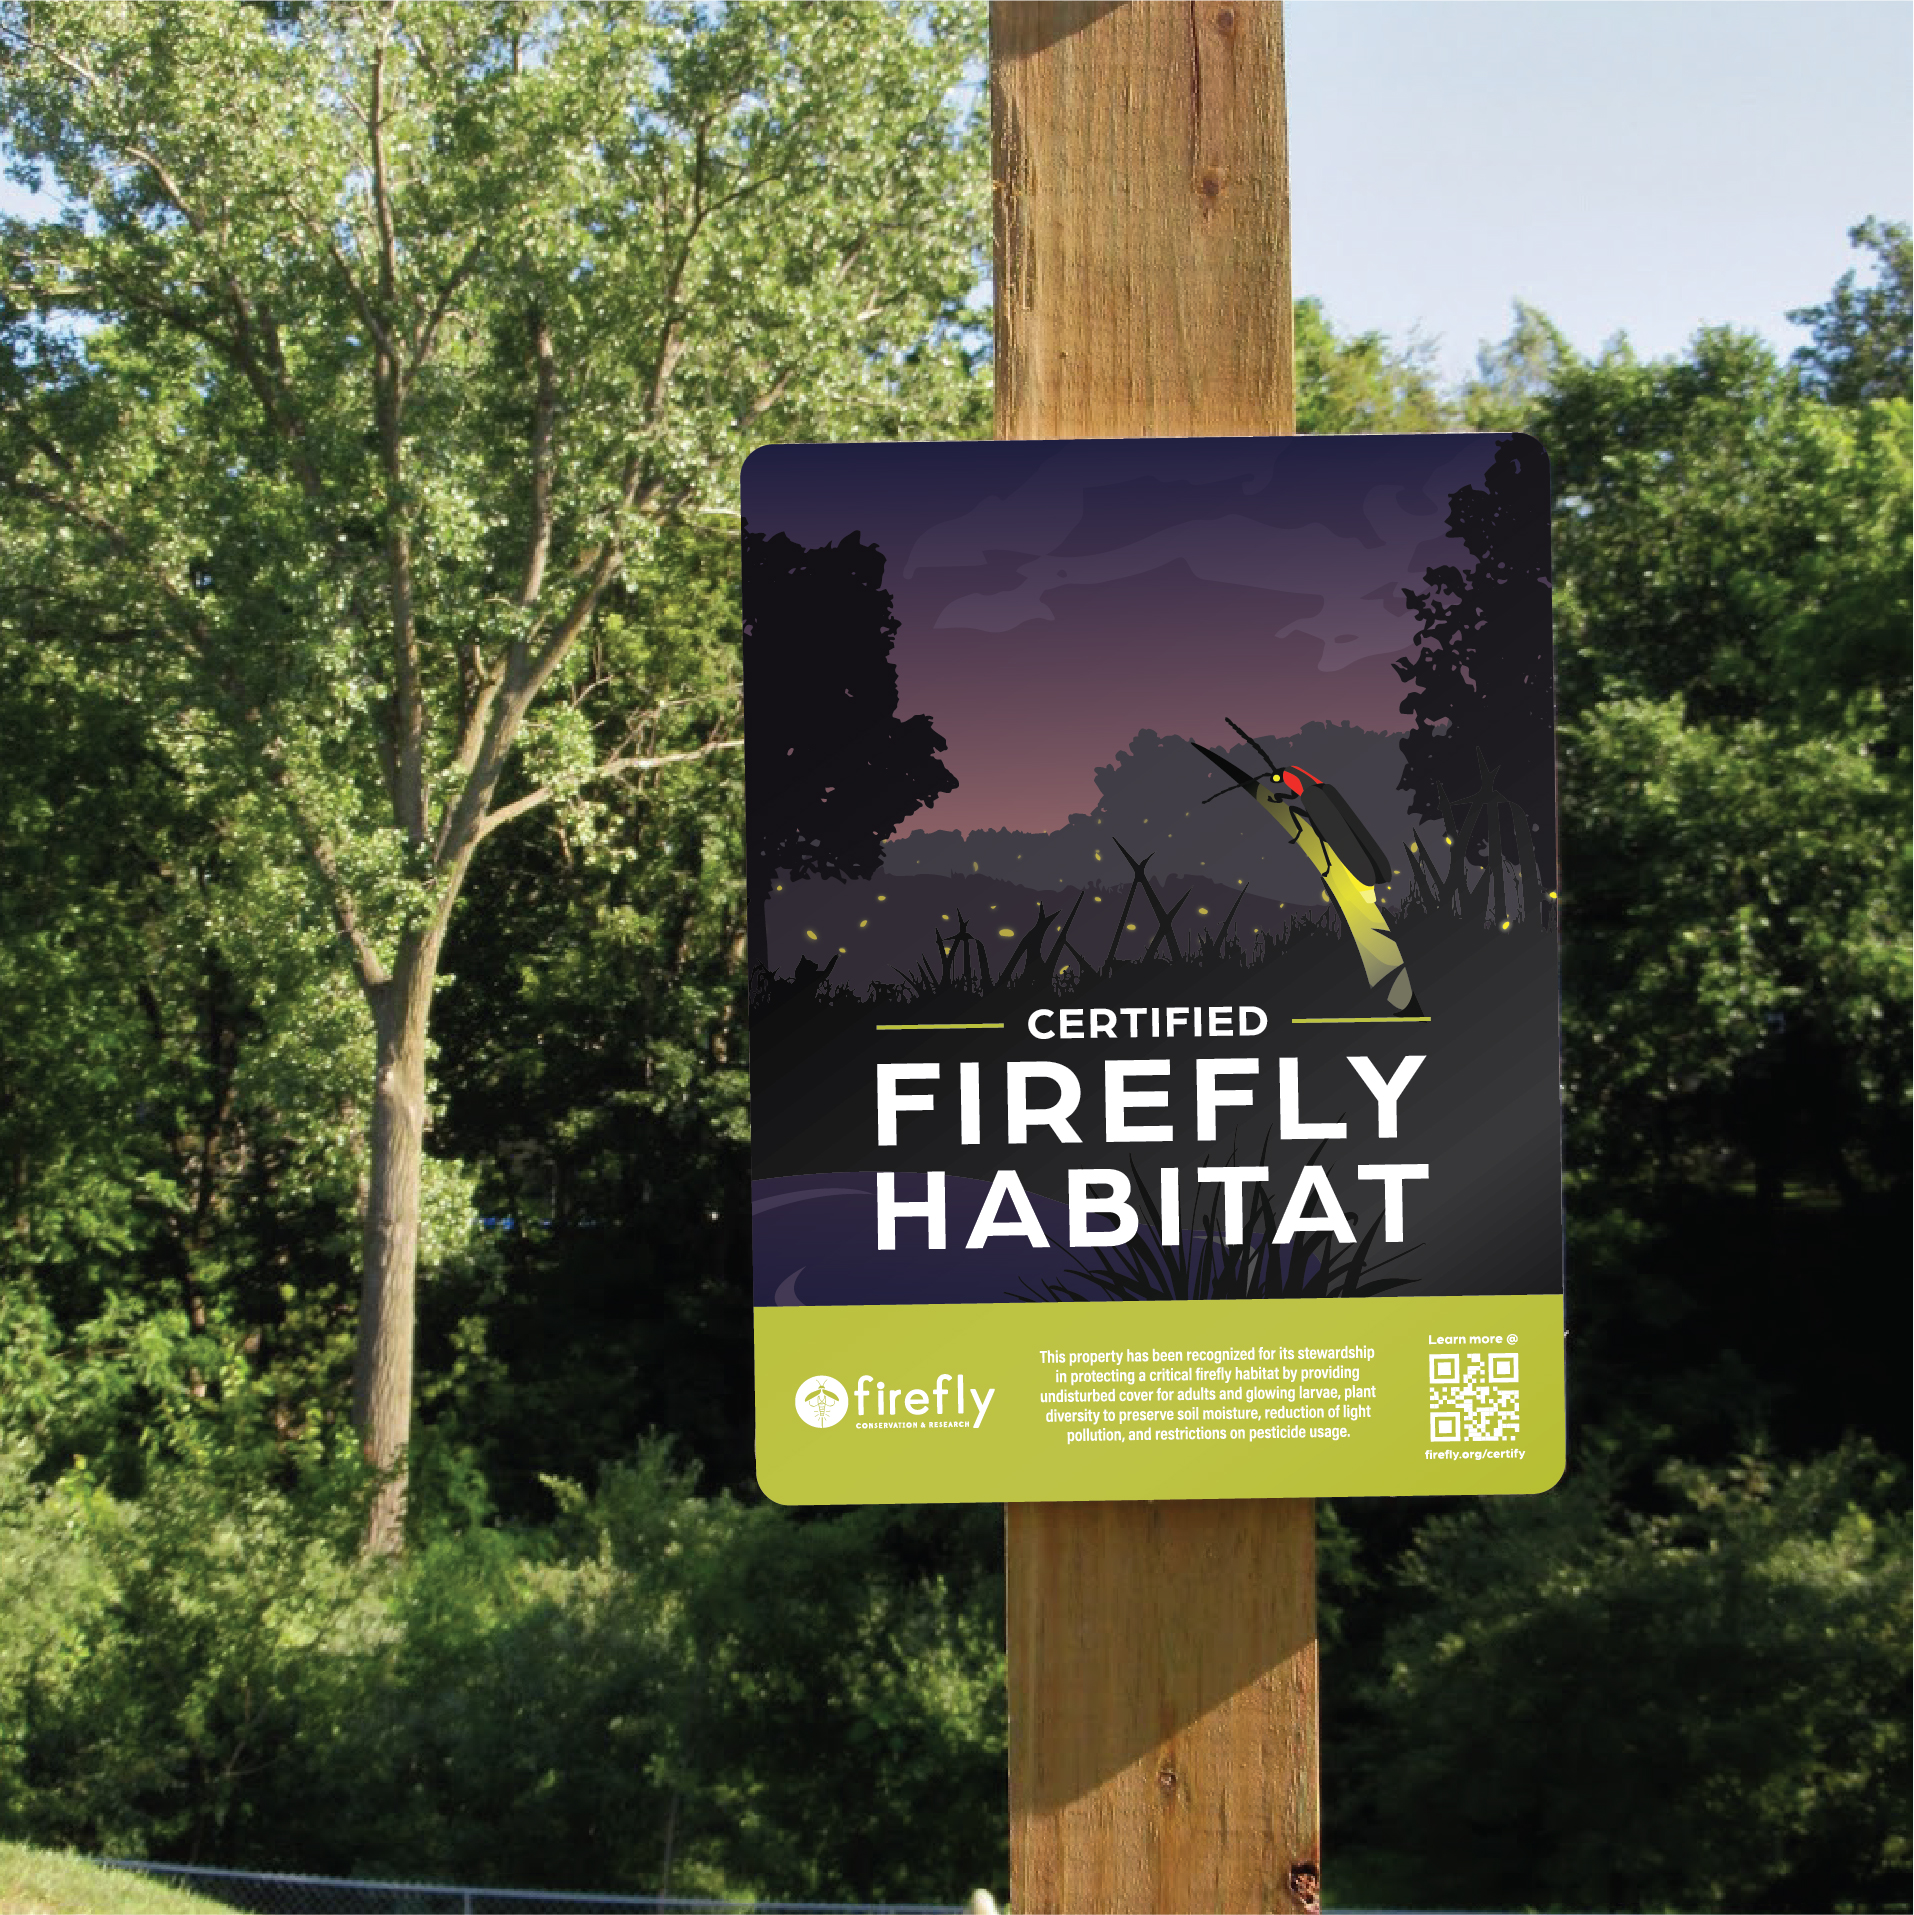 Designate your backyard, nature preserve or land as a Certified Firefly Habitat